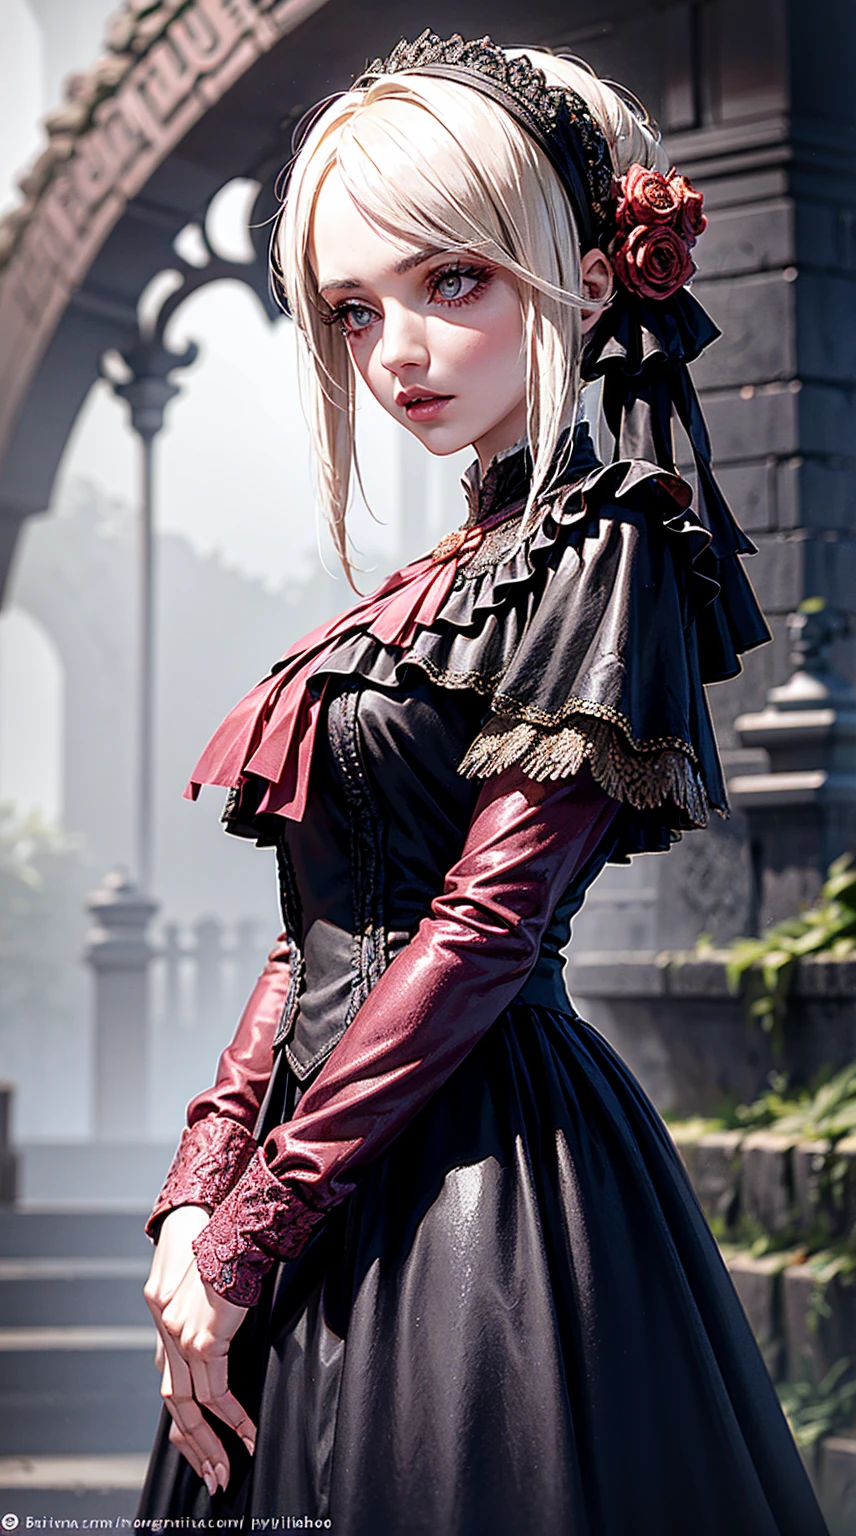 1 girl, beautiful, pink eyes, blond hair, big G cup breasts (huge breasts 1.5), short dress, wide hips, Thin waist, gloomy environment, bloodborne, victorian style buildings, fog